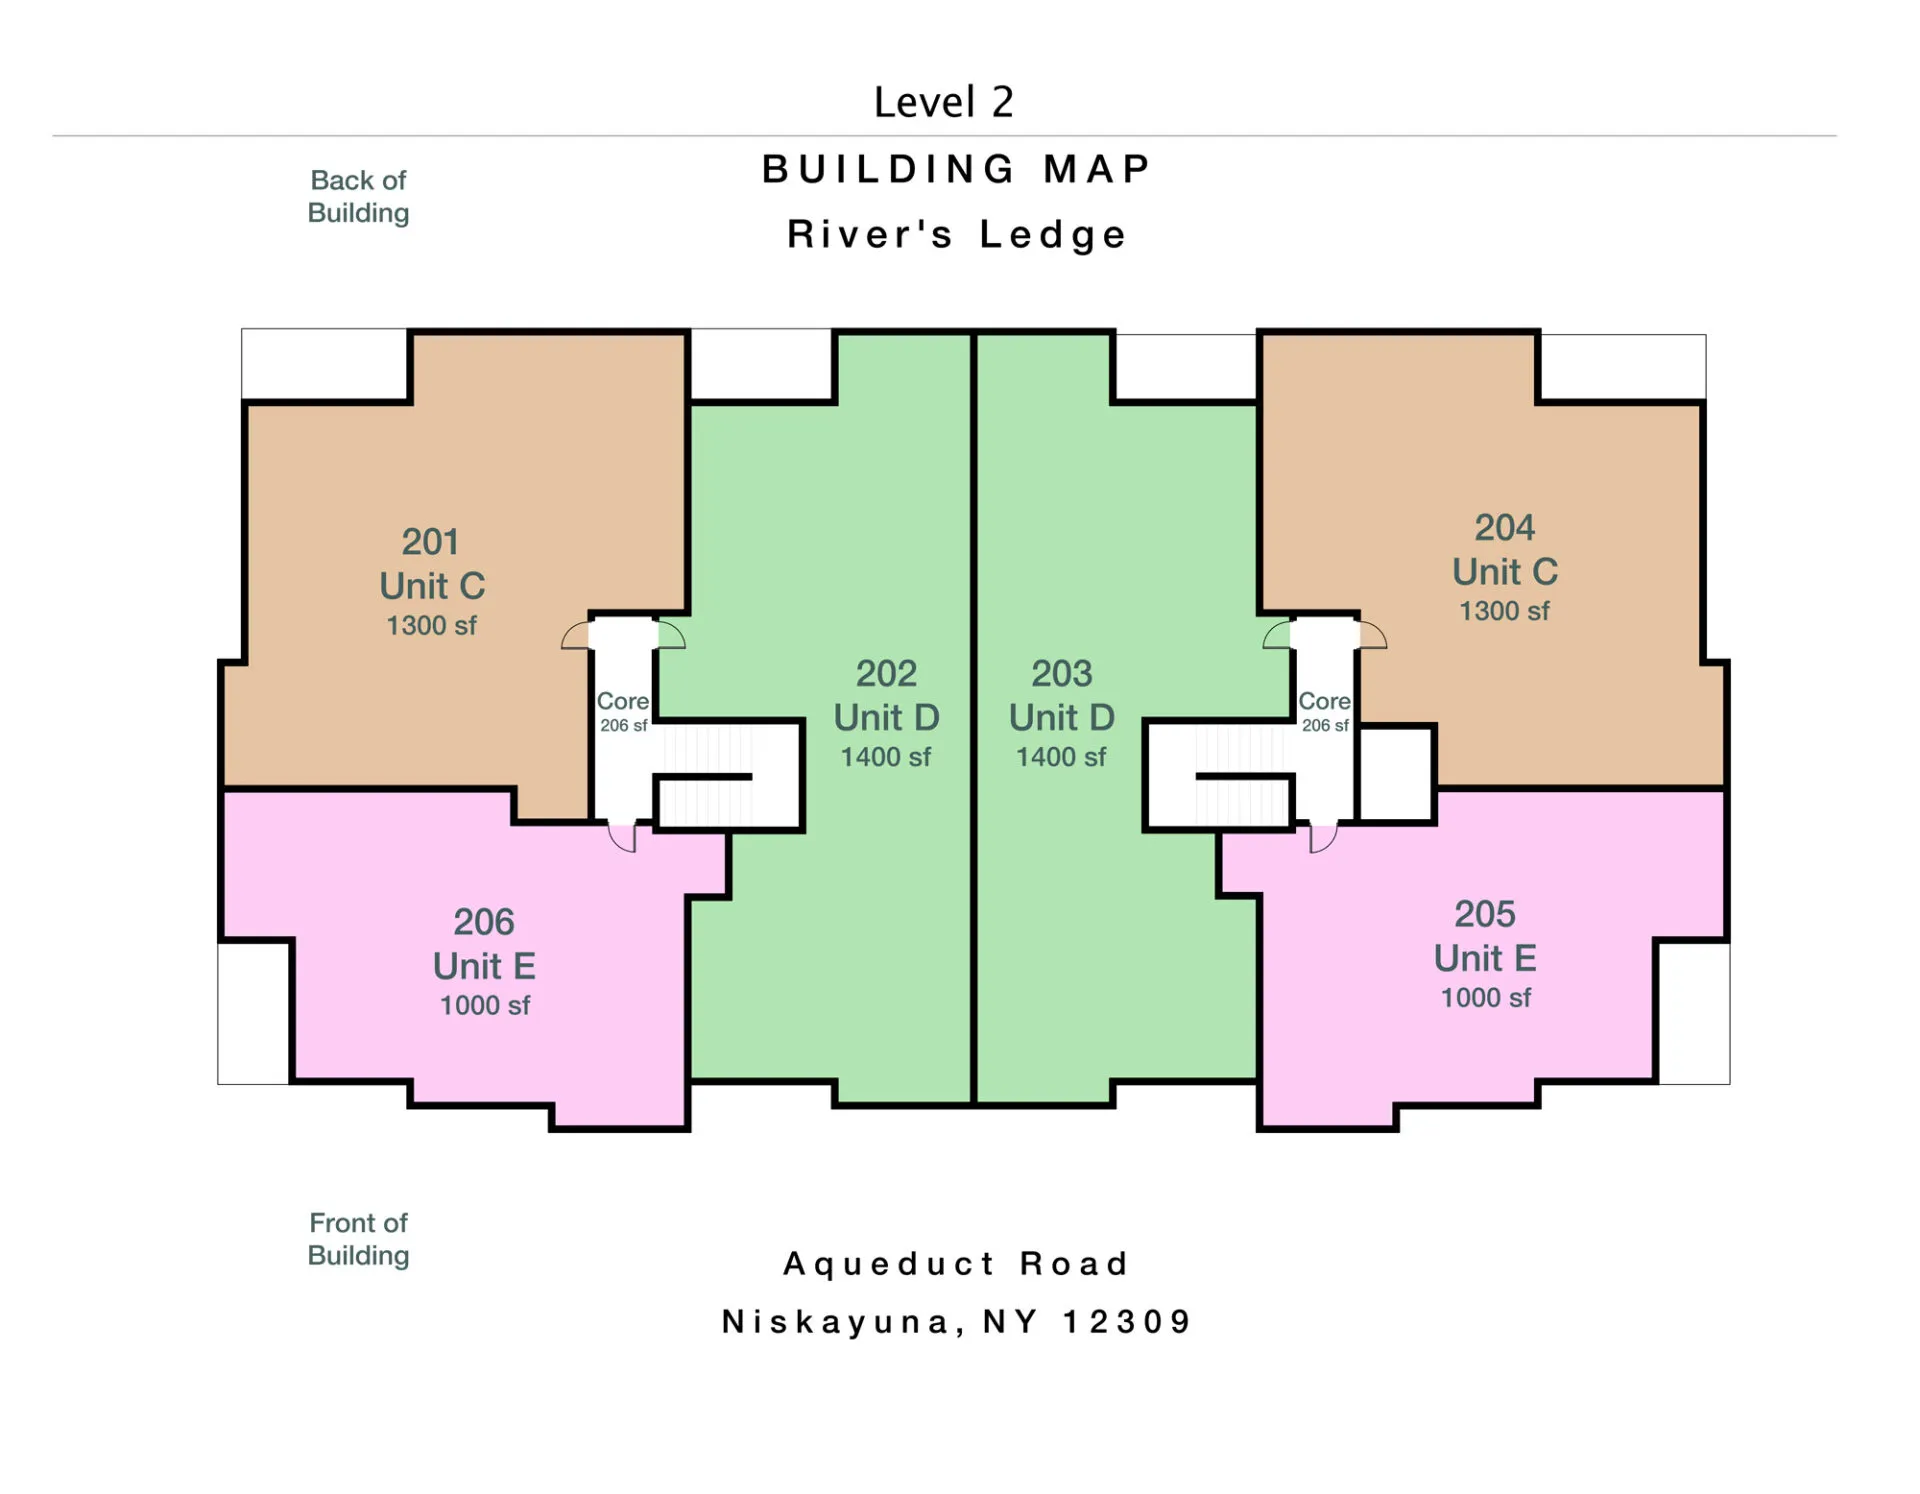 Rivers Ledge Building Map Showing Apartment Units and Private Garages